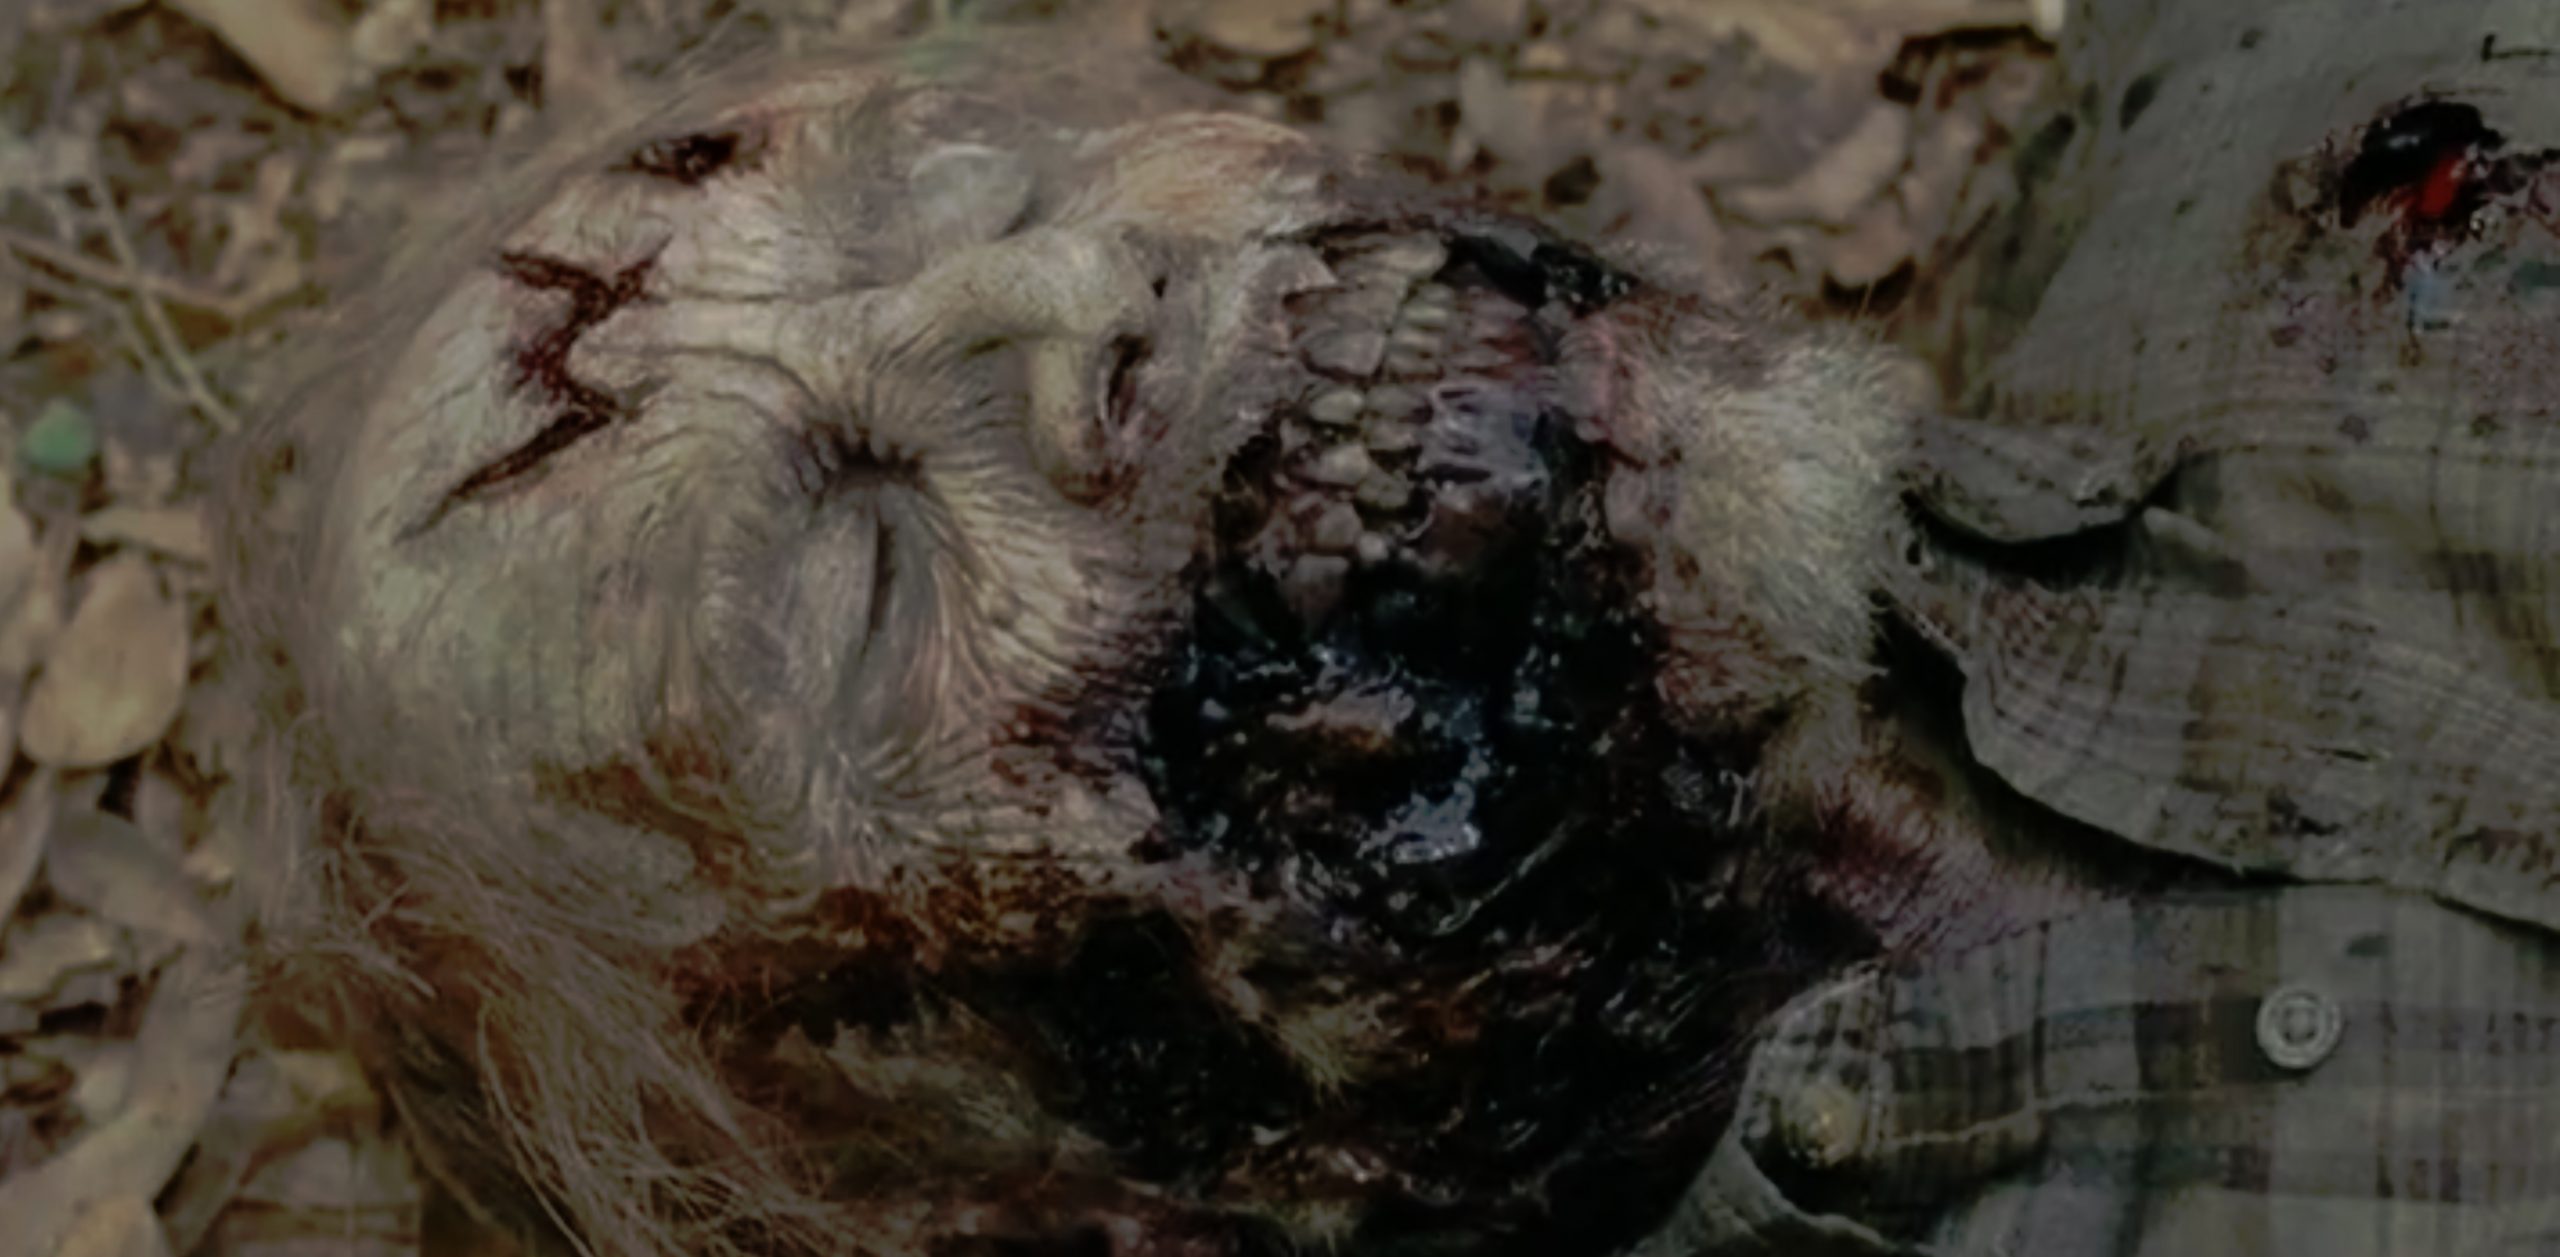 Walking Dead Speculation: What Do the W's on the Walkers Mean?